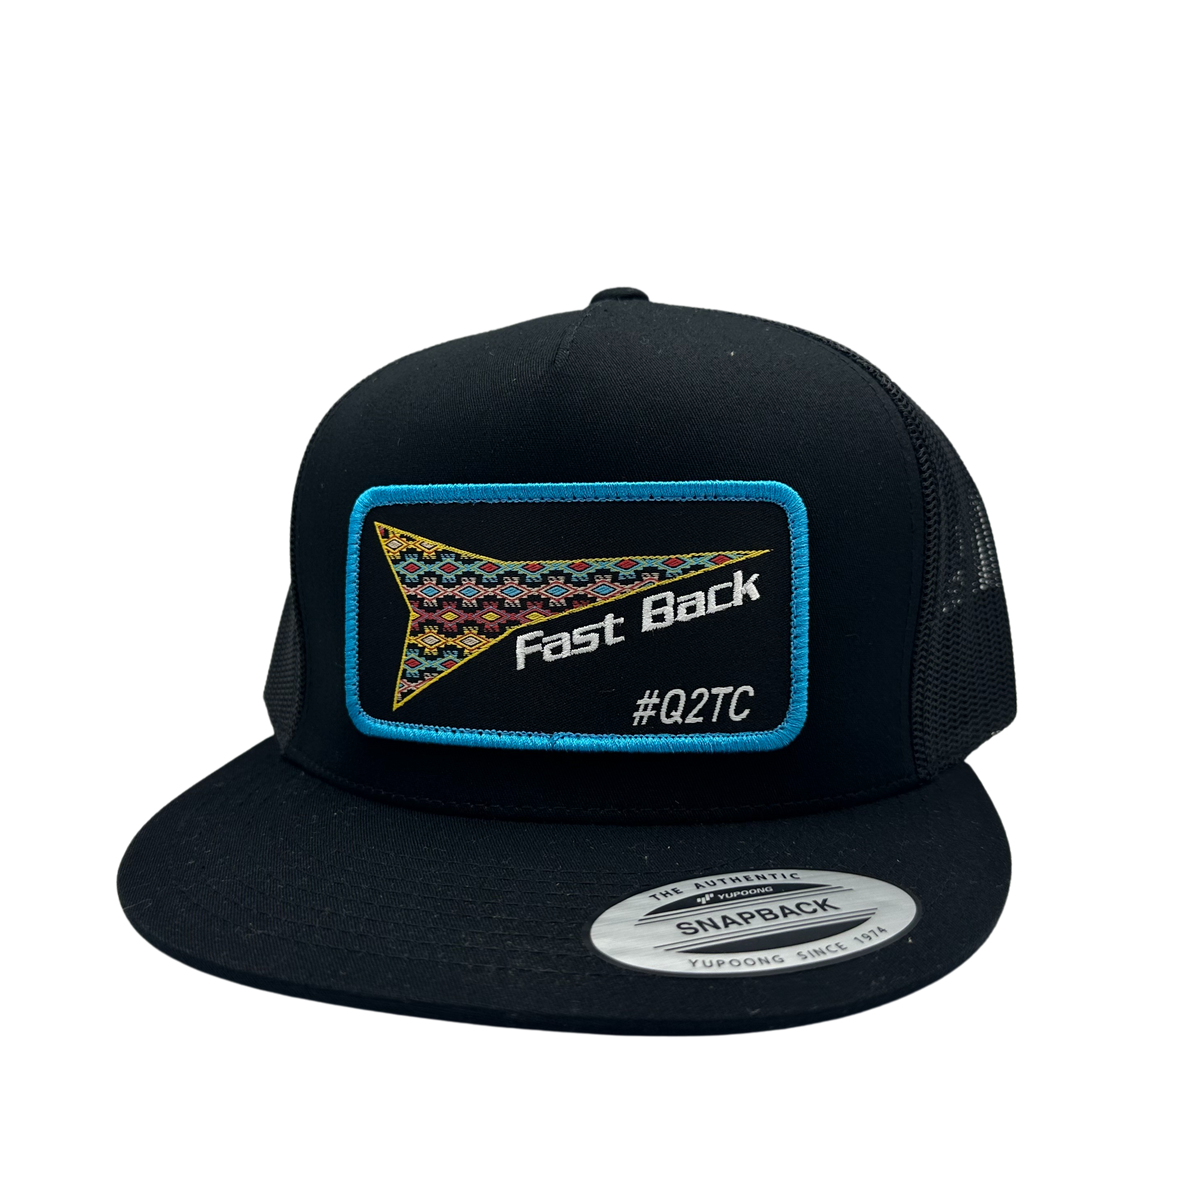 Red Dirt Hat Co X Fast Back Ropes Aztec Black Cap